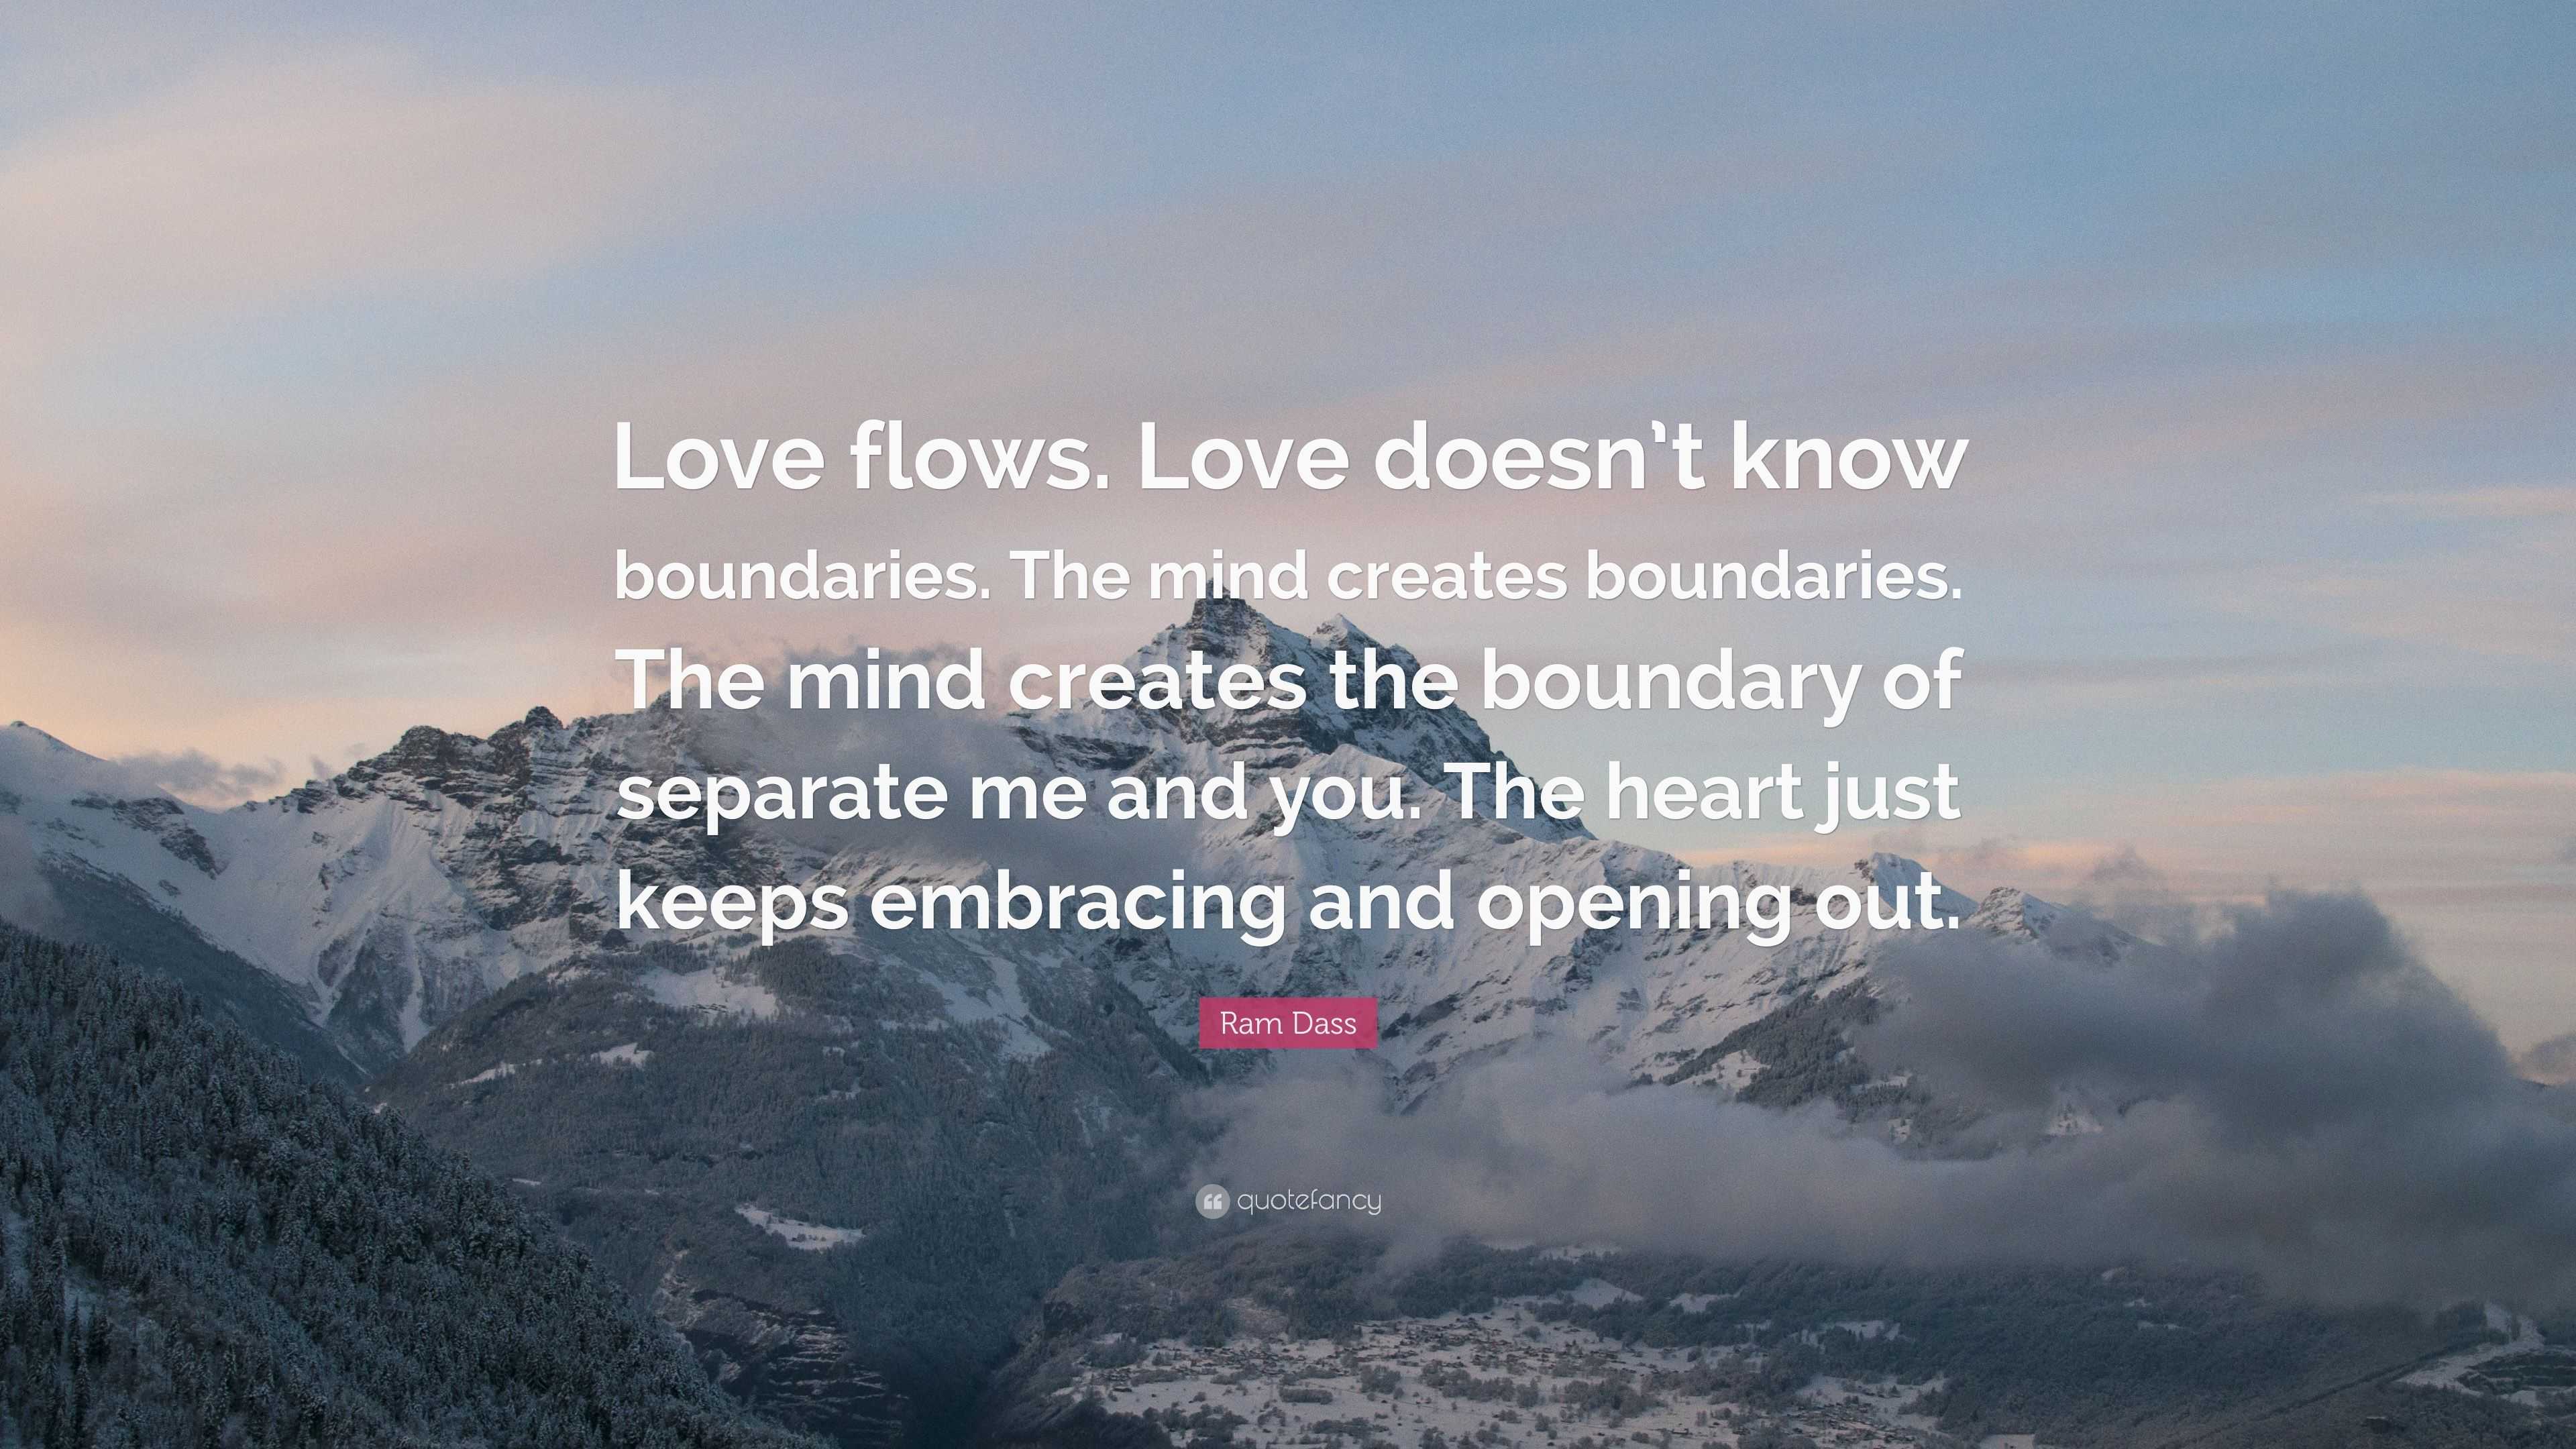 Ram Dass Quote: "Love flows. Love doesn't know boundaries. The mind creates boundaries. The mind ...